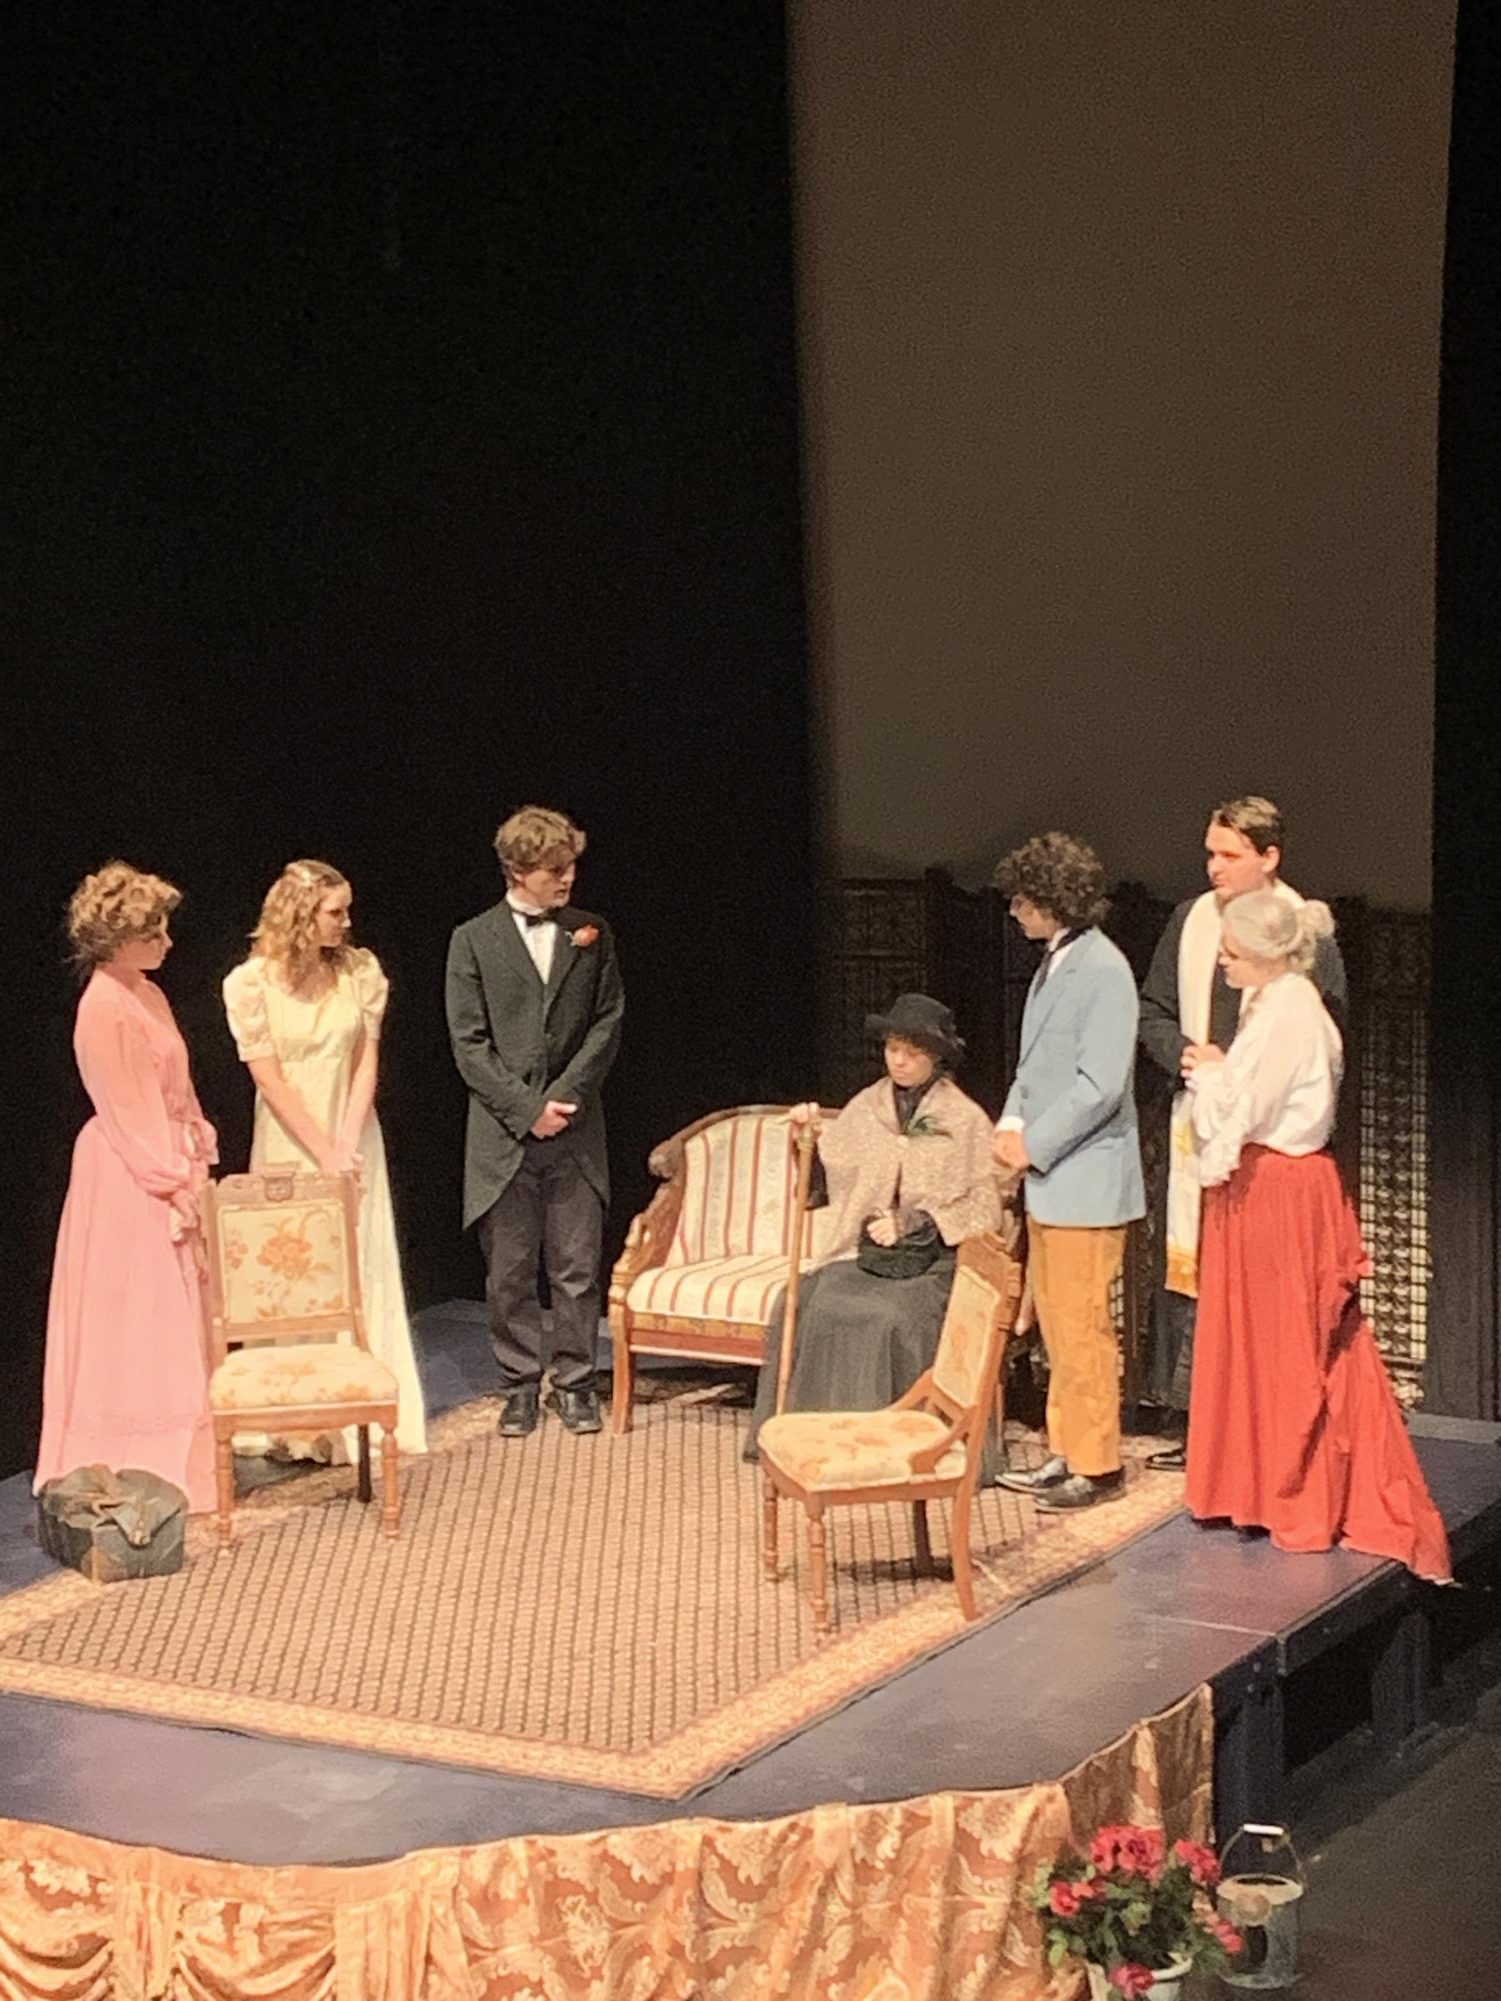 Upperclassmen cast members learn about the history of John Worthing in the play The Importance of Being Earnest, by Oscar Wilde. 